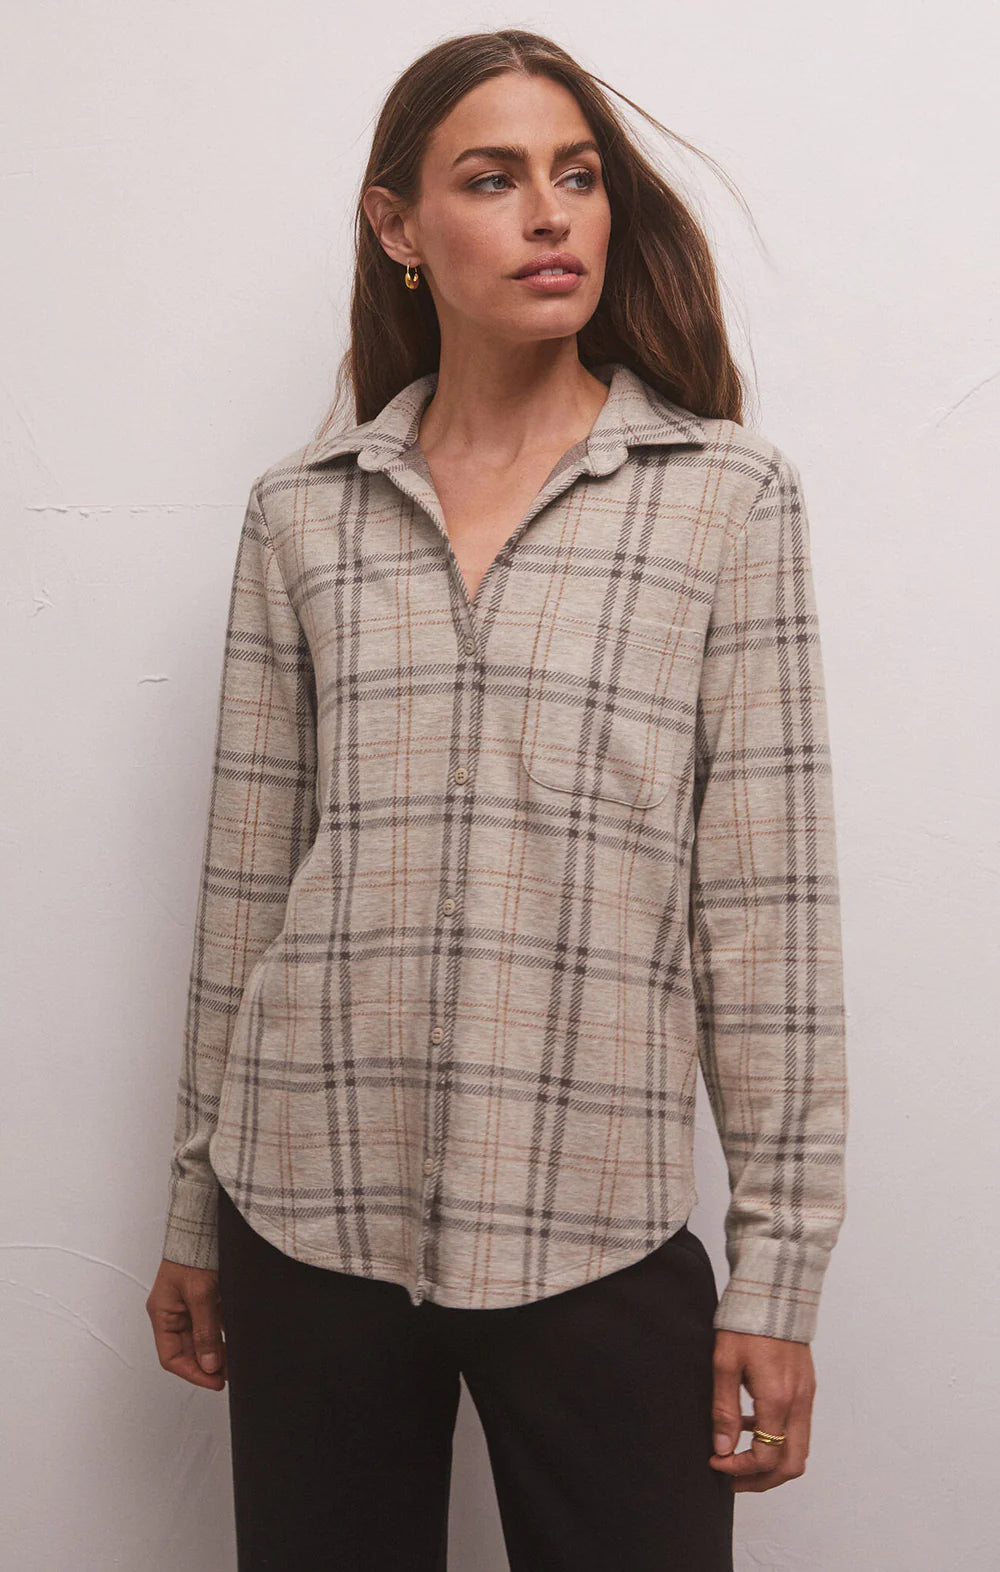 Zenith Plaid Shirt in Charcoal Heather